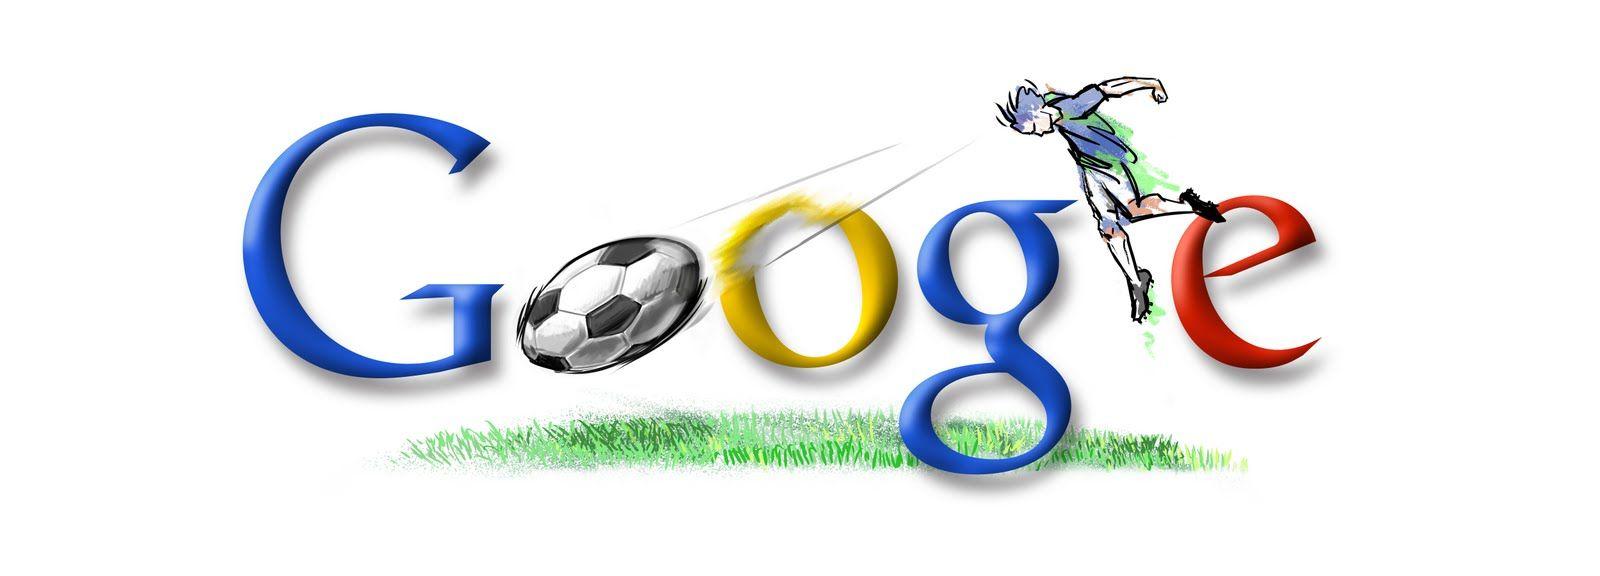 Football Google Logo - Google New Zealand Blog: Love football? Then vote for your favourite ...